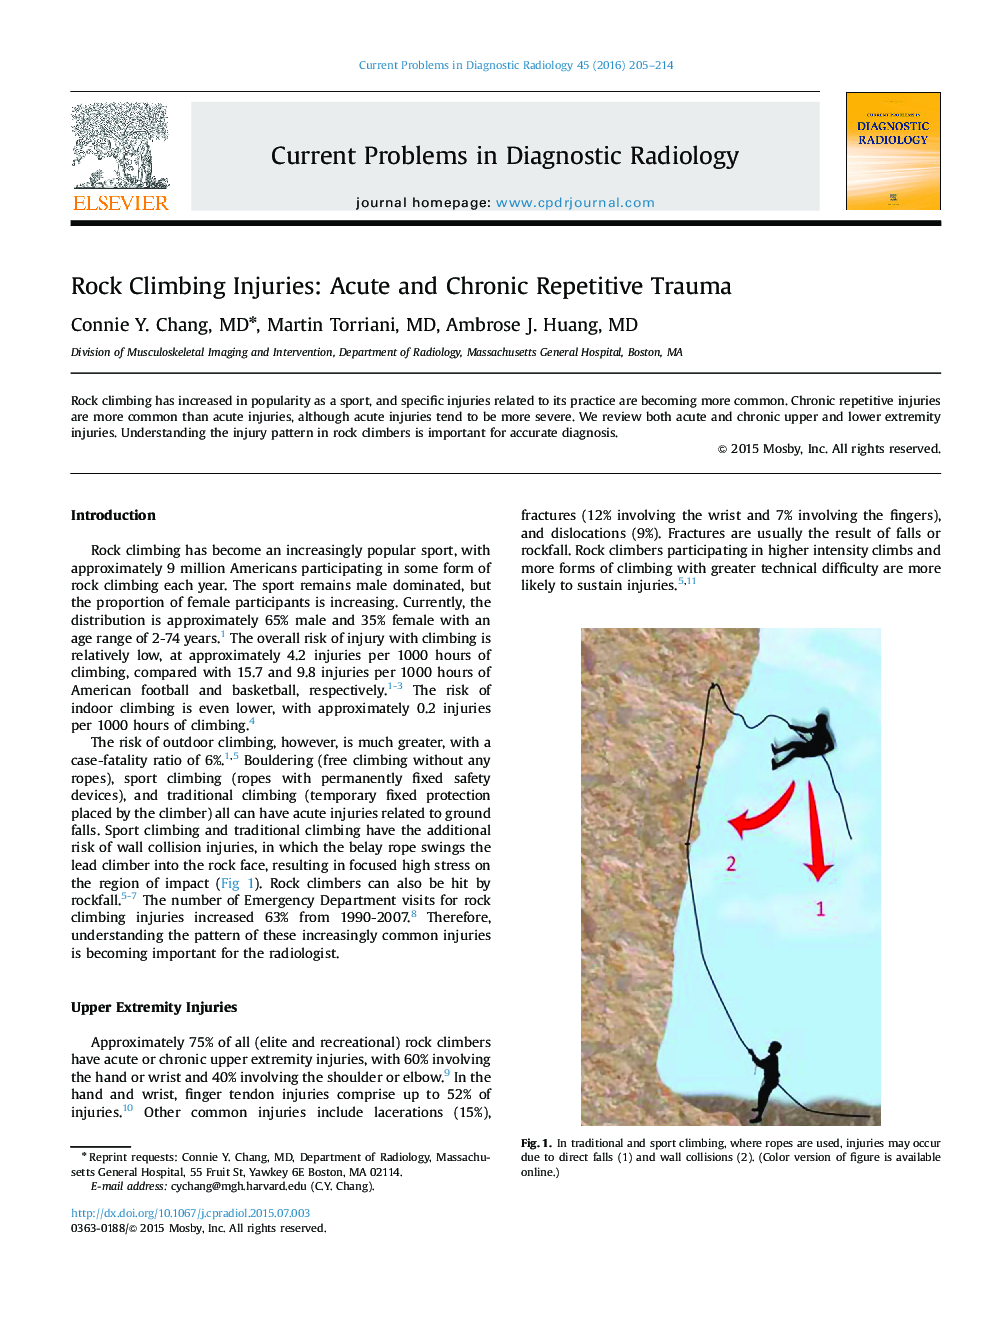 Rock Climbing Injuries: Acute and Chronic Repetitive Trauma